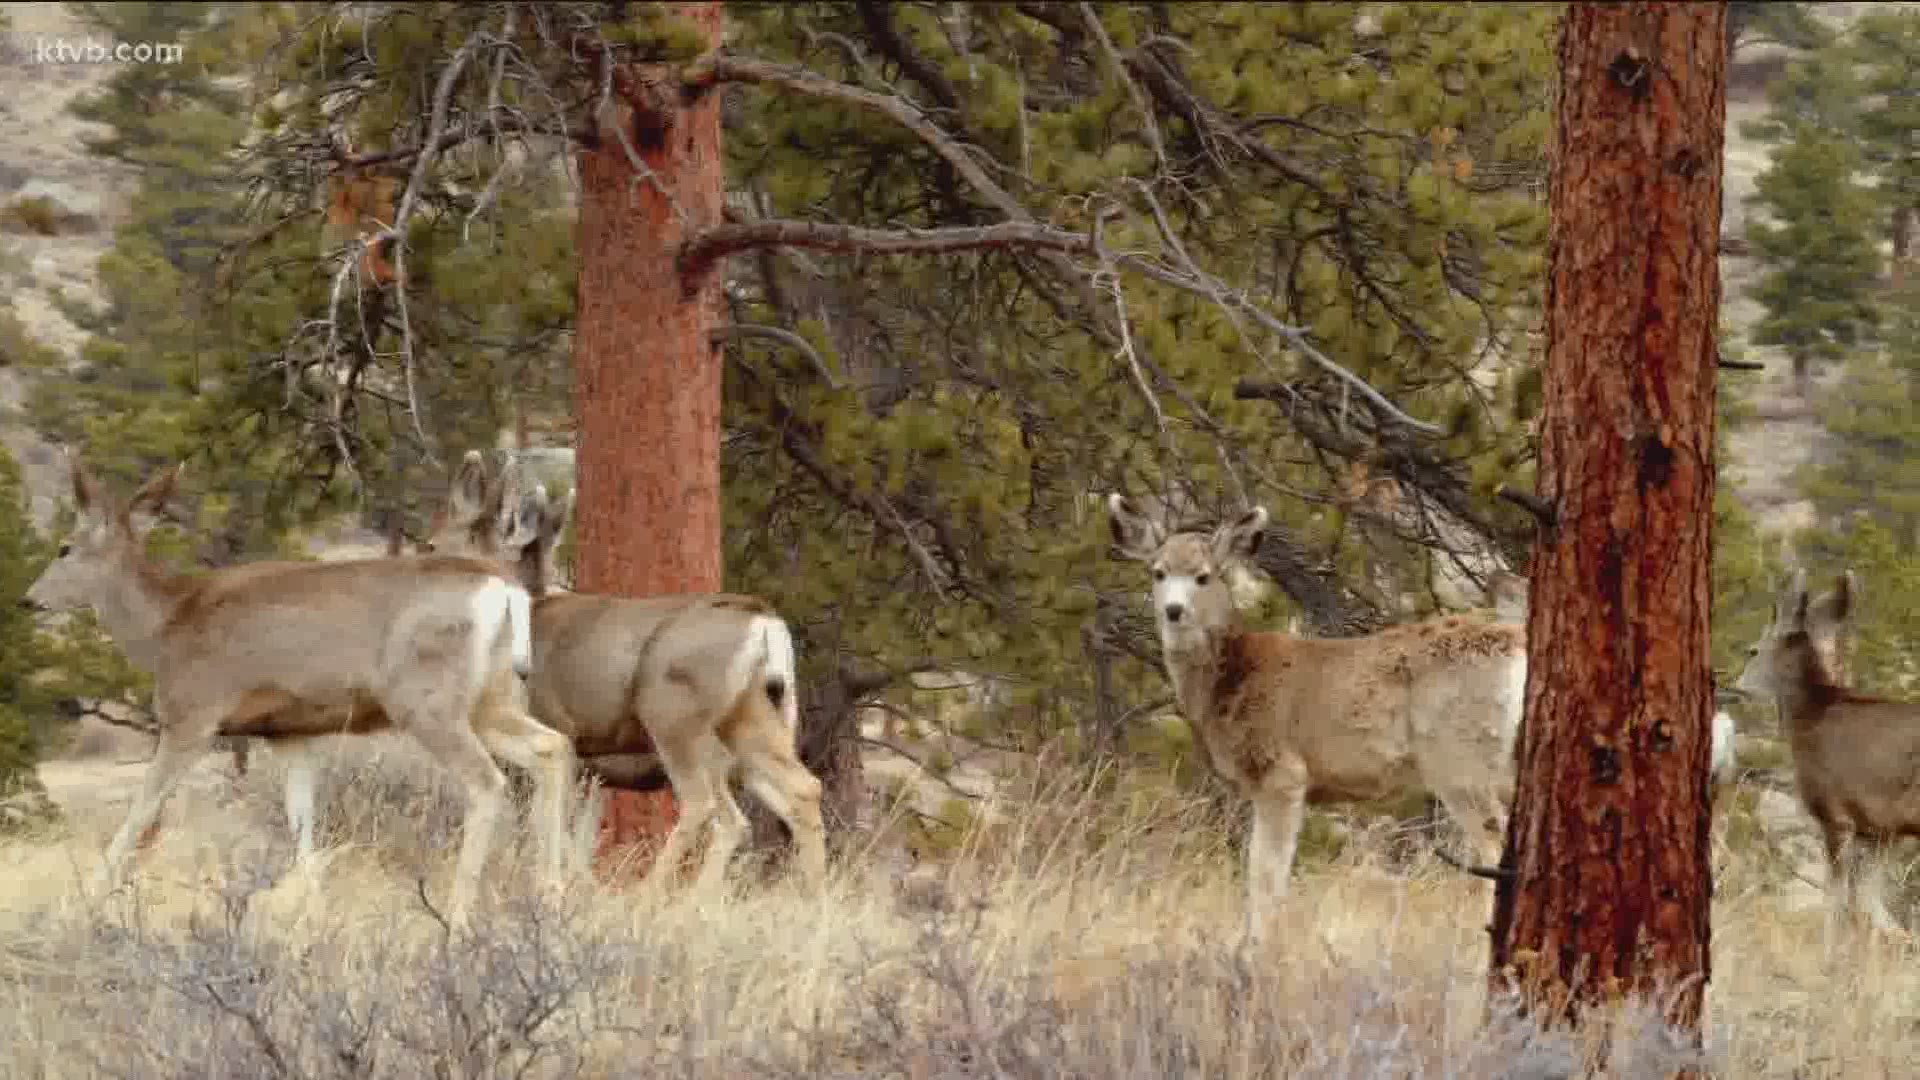 Some says wildlife is coming too close to town. The deer are attracting mountain lions, and that worries McCall's police chief.